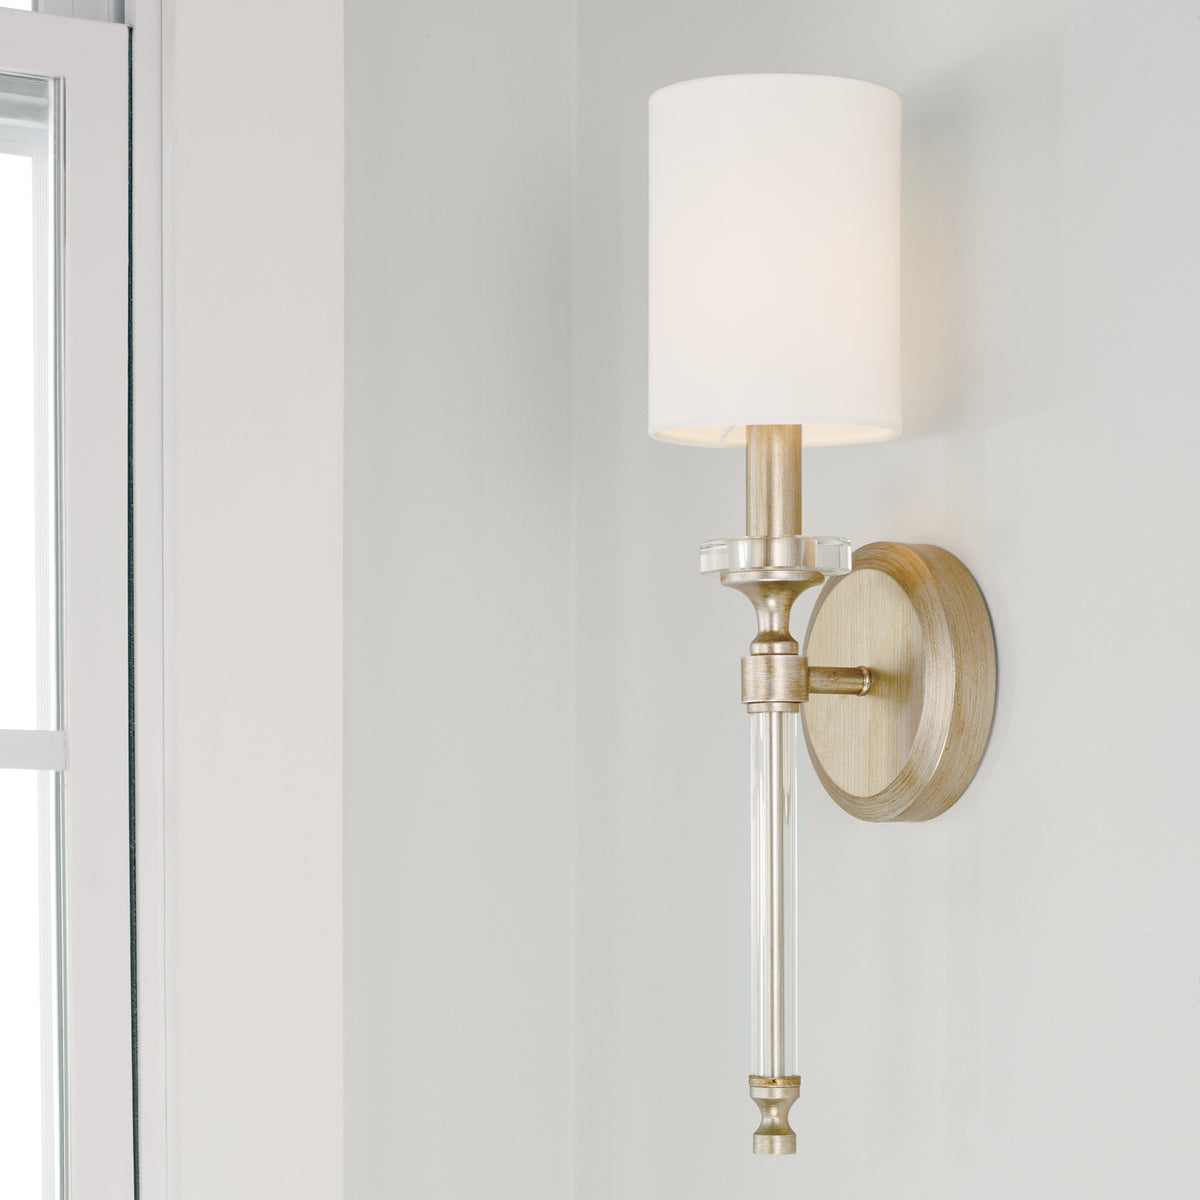 Breigh Wall Sconce